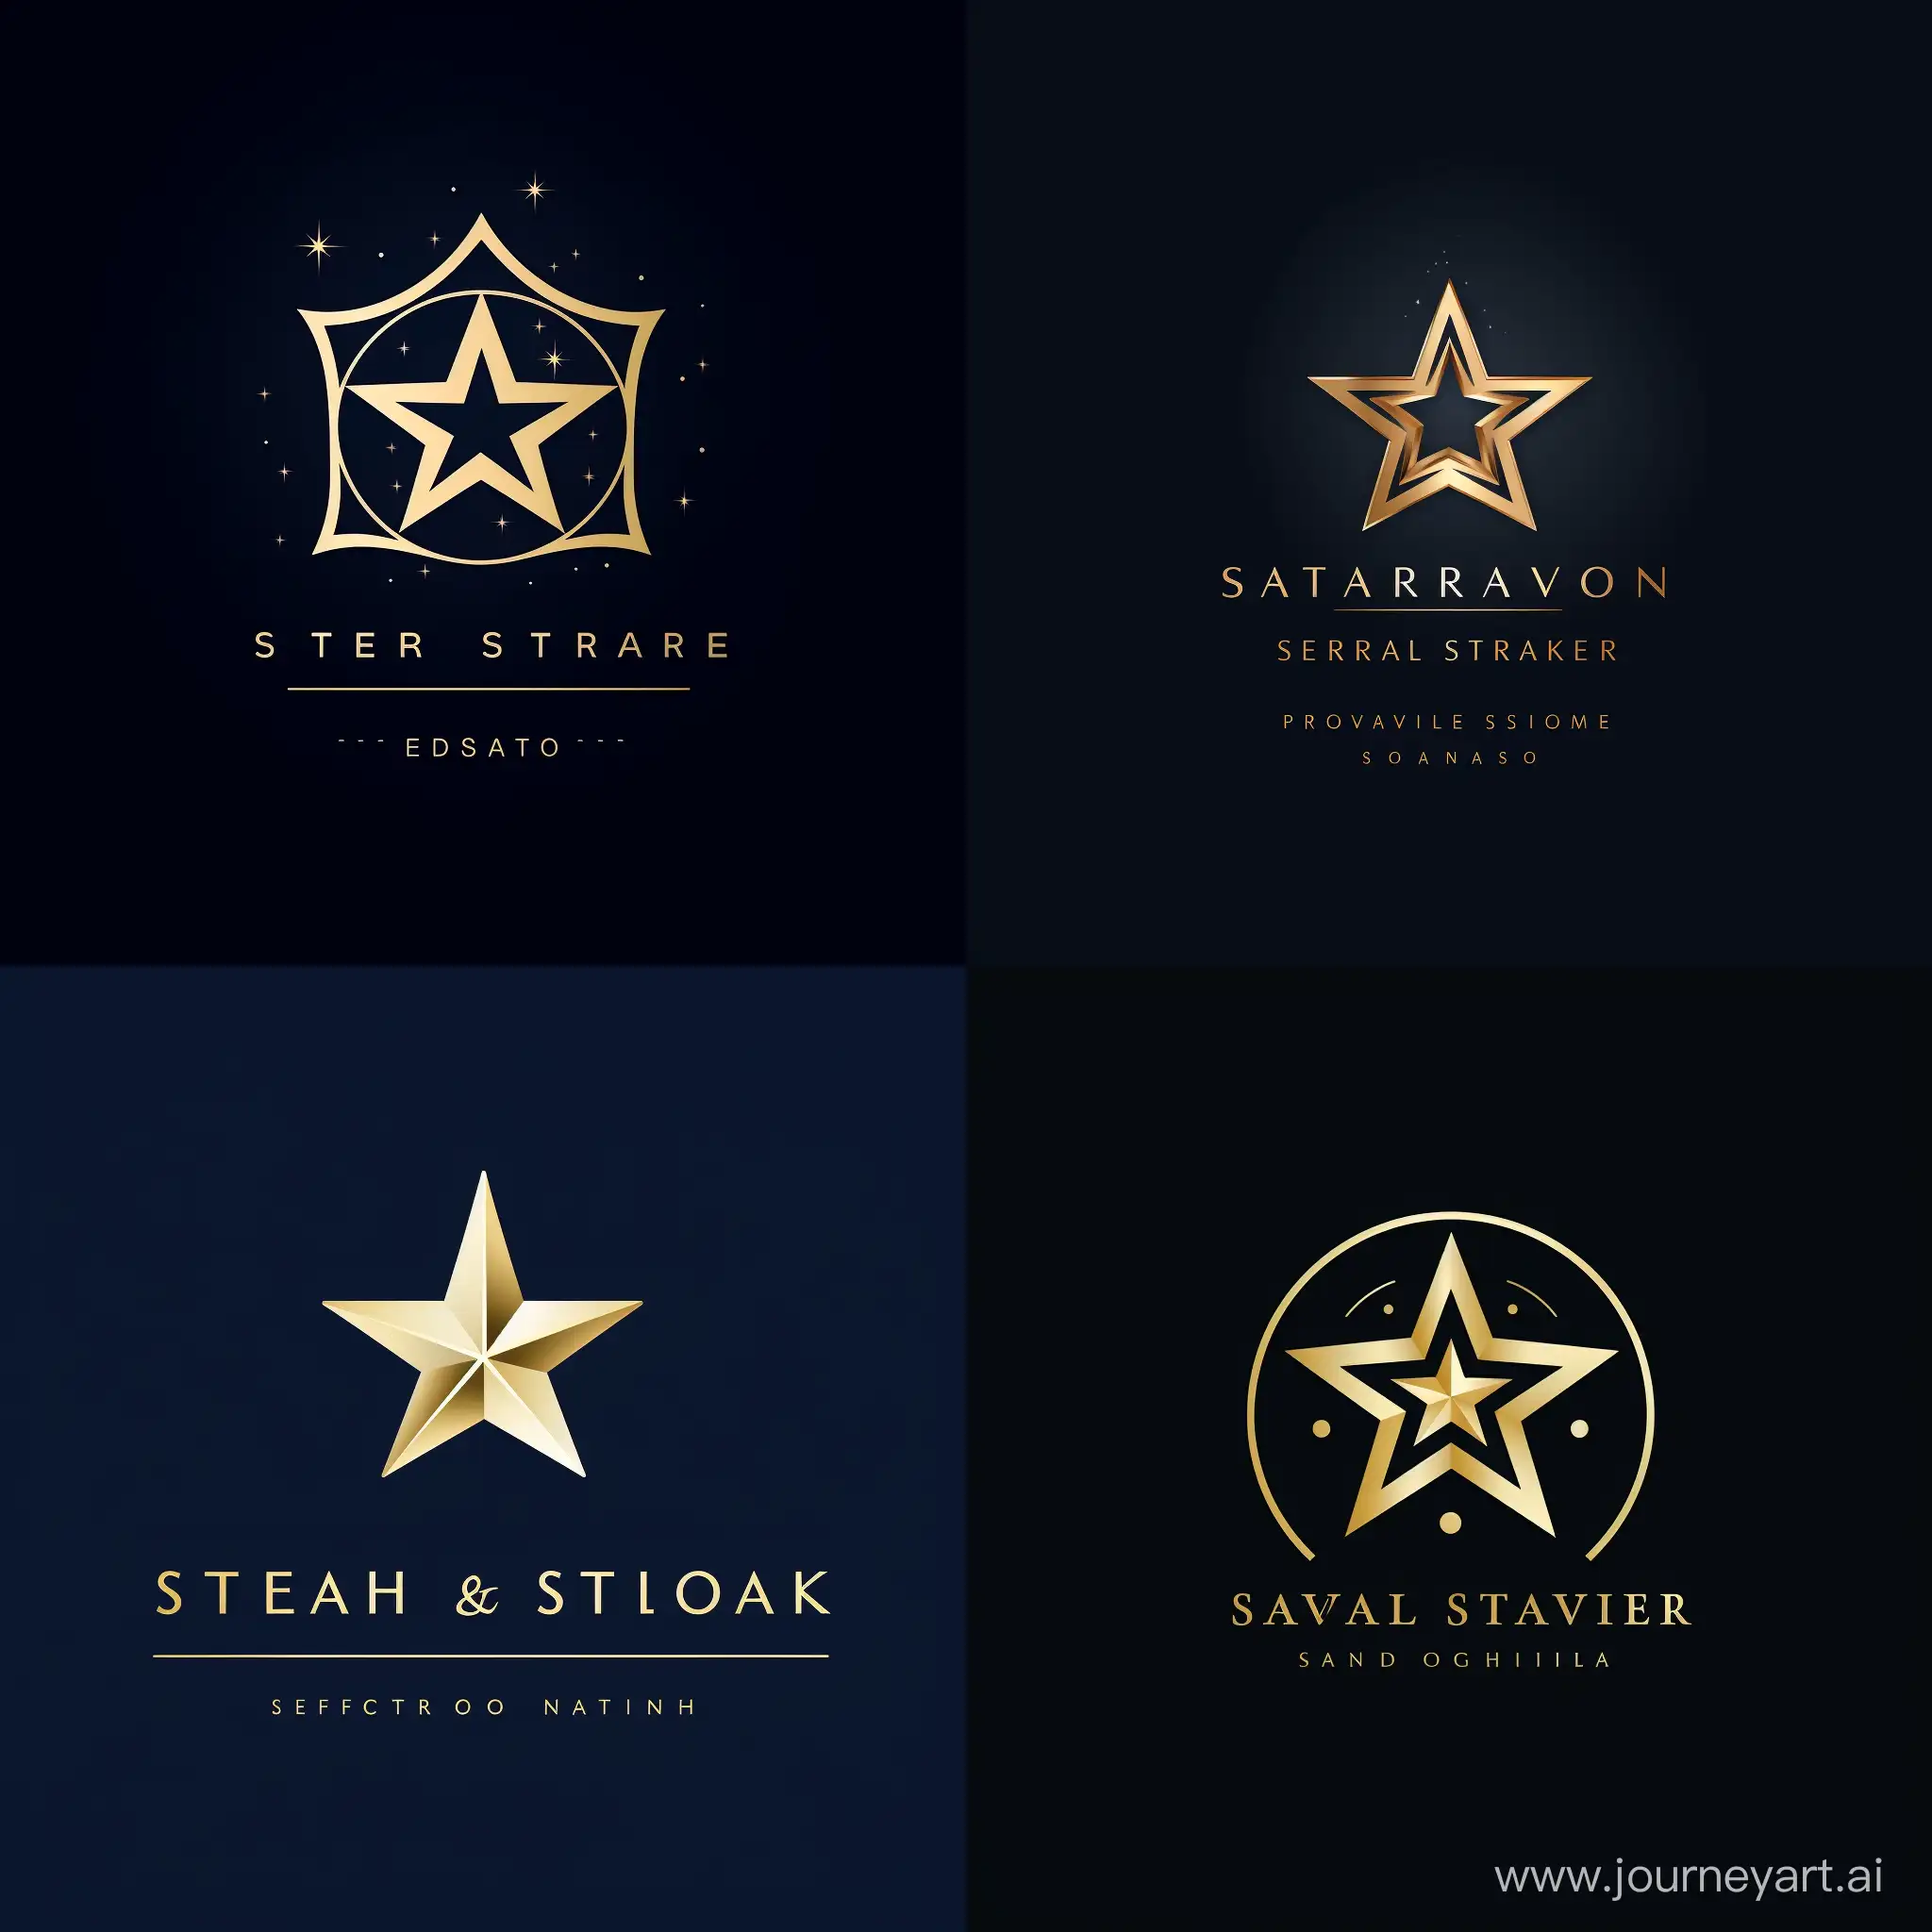 create a logo for a company, working in the selling and marketing of the luxury residentials, the name of the company expresses a bright burning star